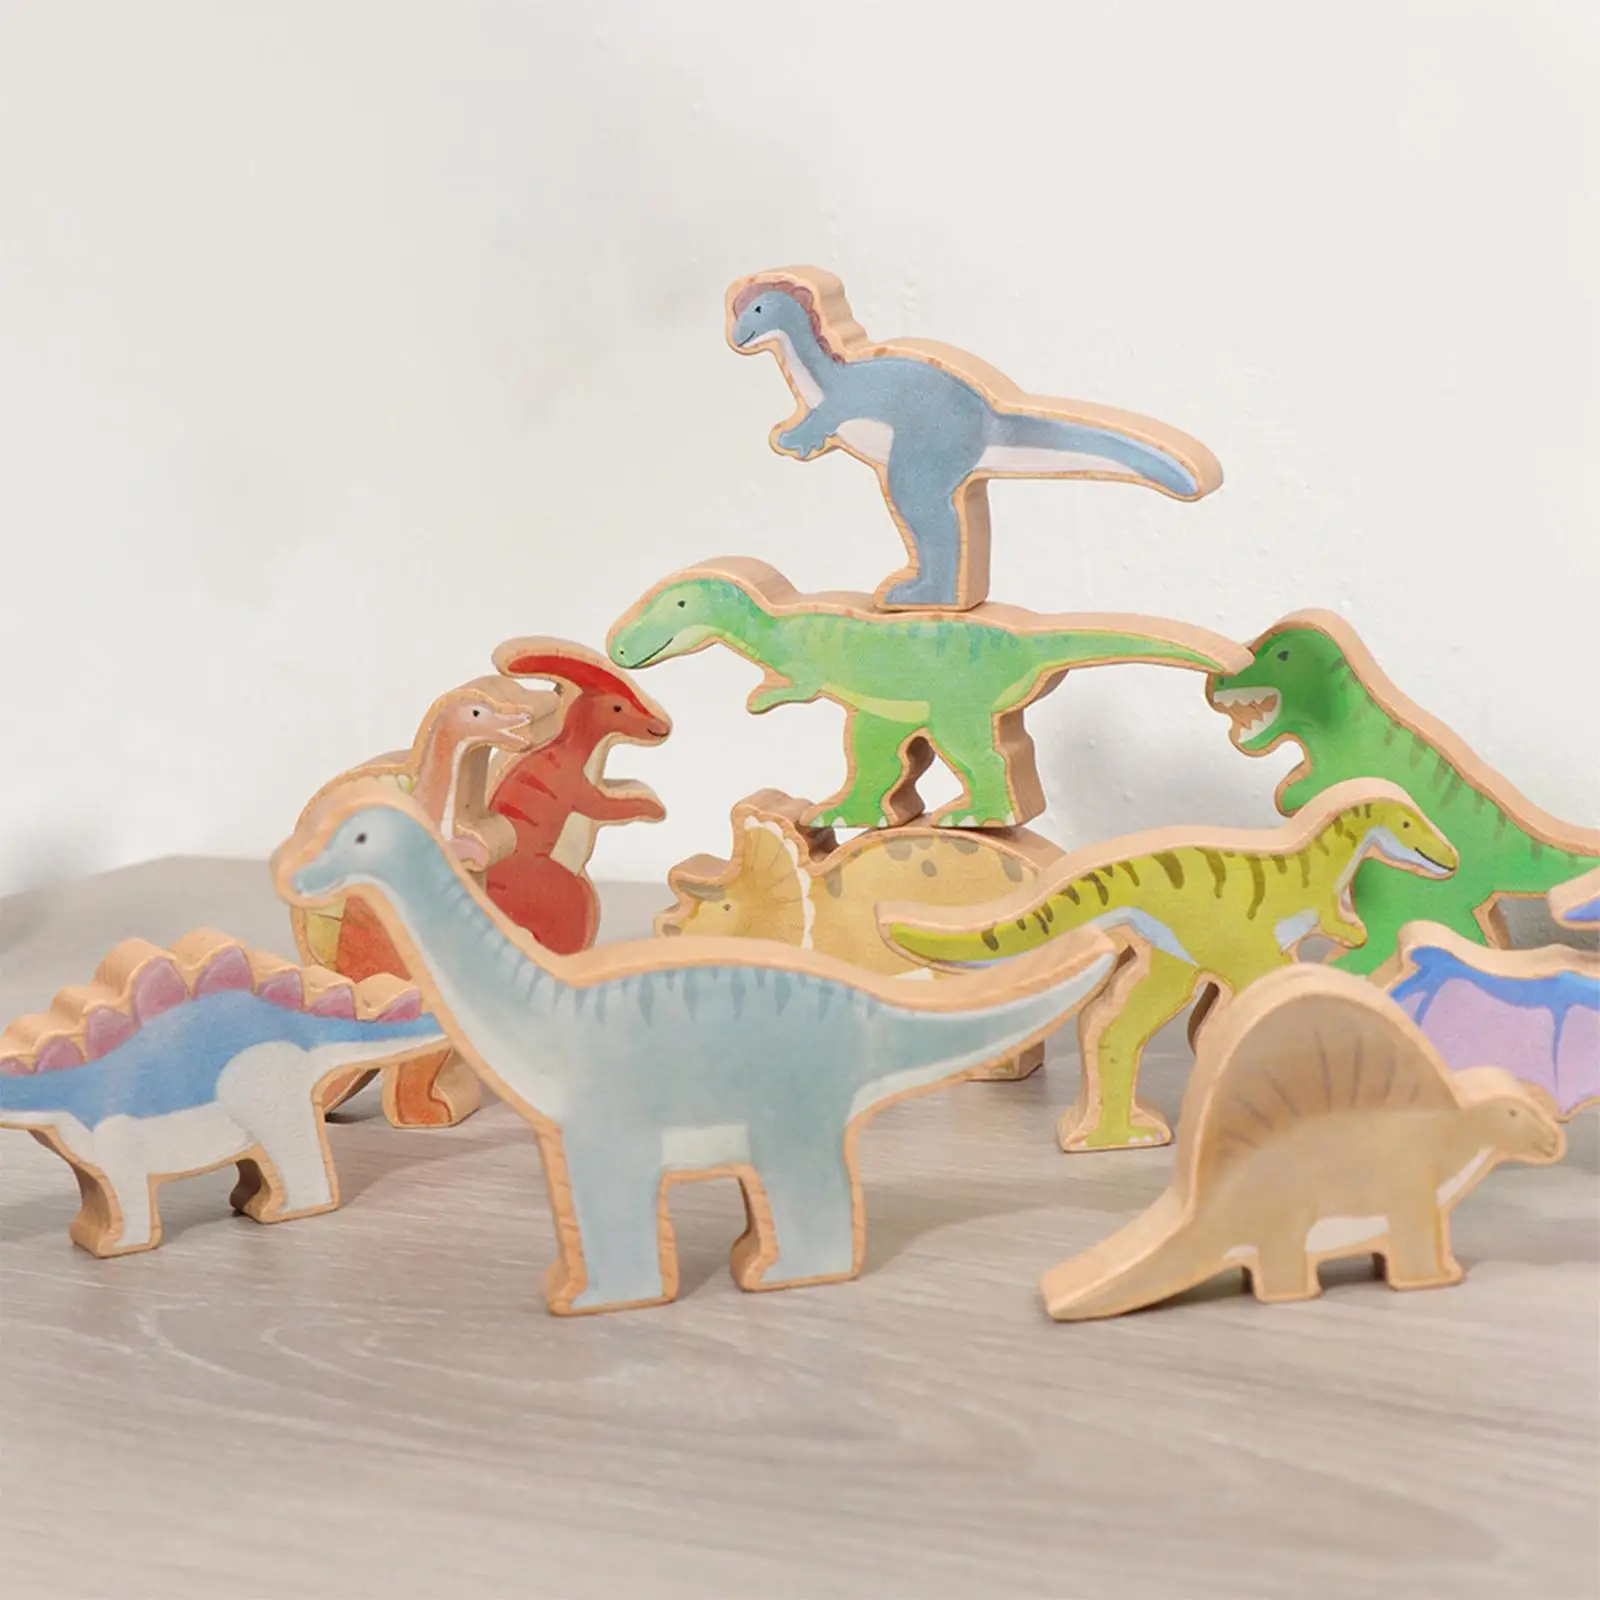 Wood Dinosaurs Balance Game Learning Building Toys Funny for Girls Boys Toddler Gifts